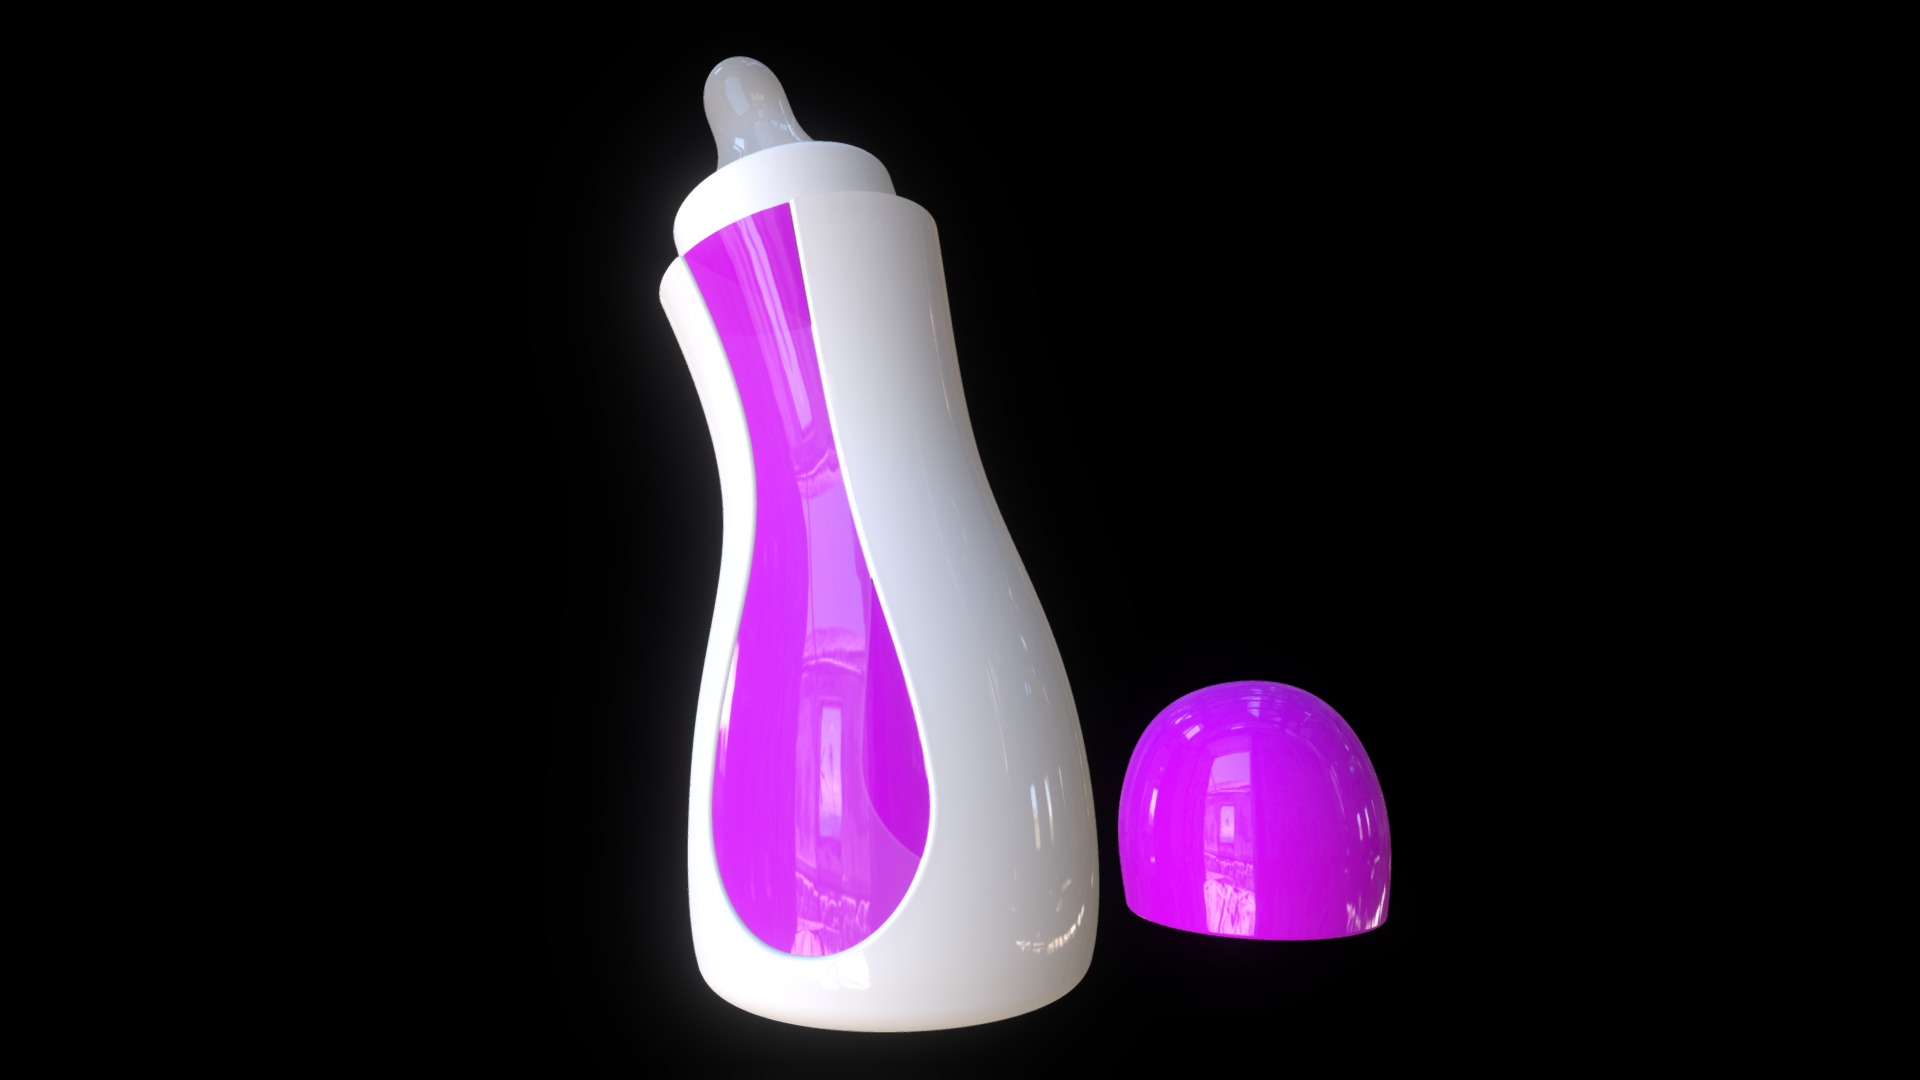 3D model MAMADERA - This is a 3D model of the MAMADERA. The 3D model is about a purple and white object.